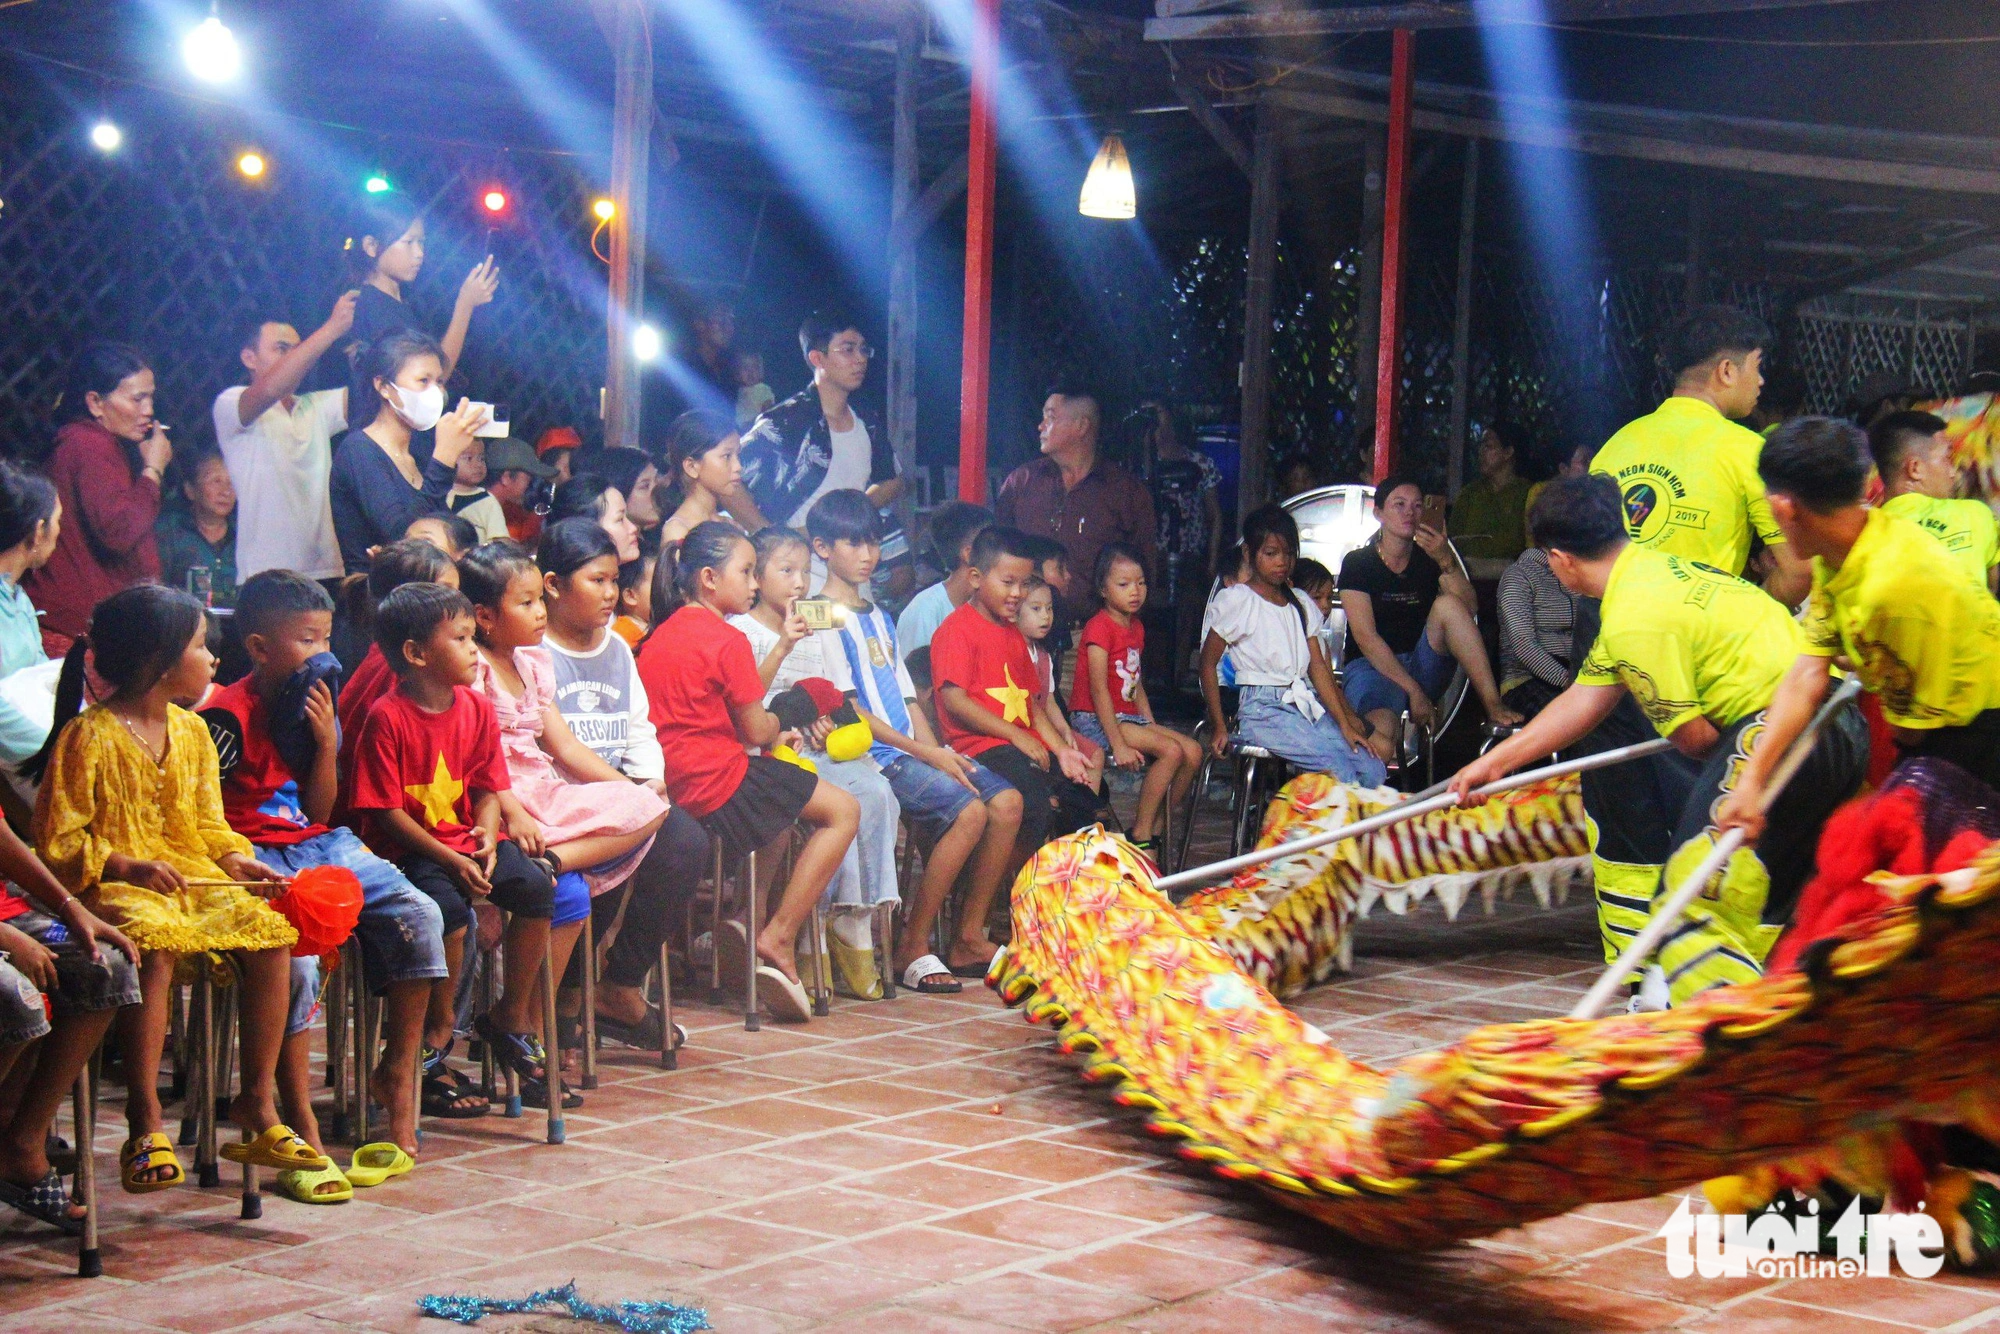 After the entertainment, the children were presented with a dragon dance.